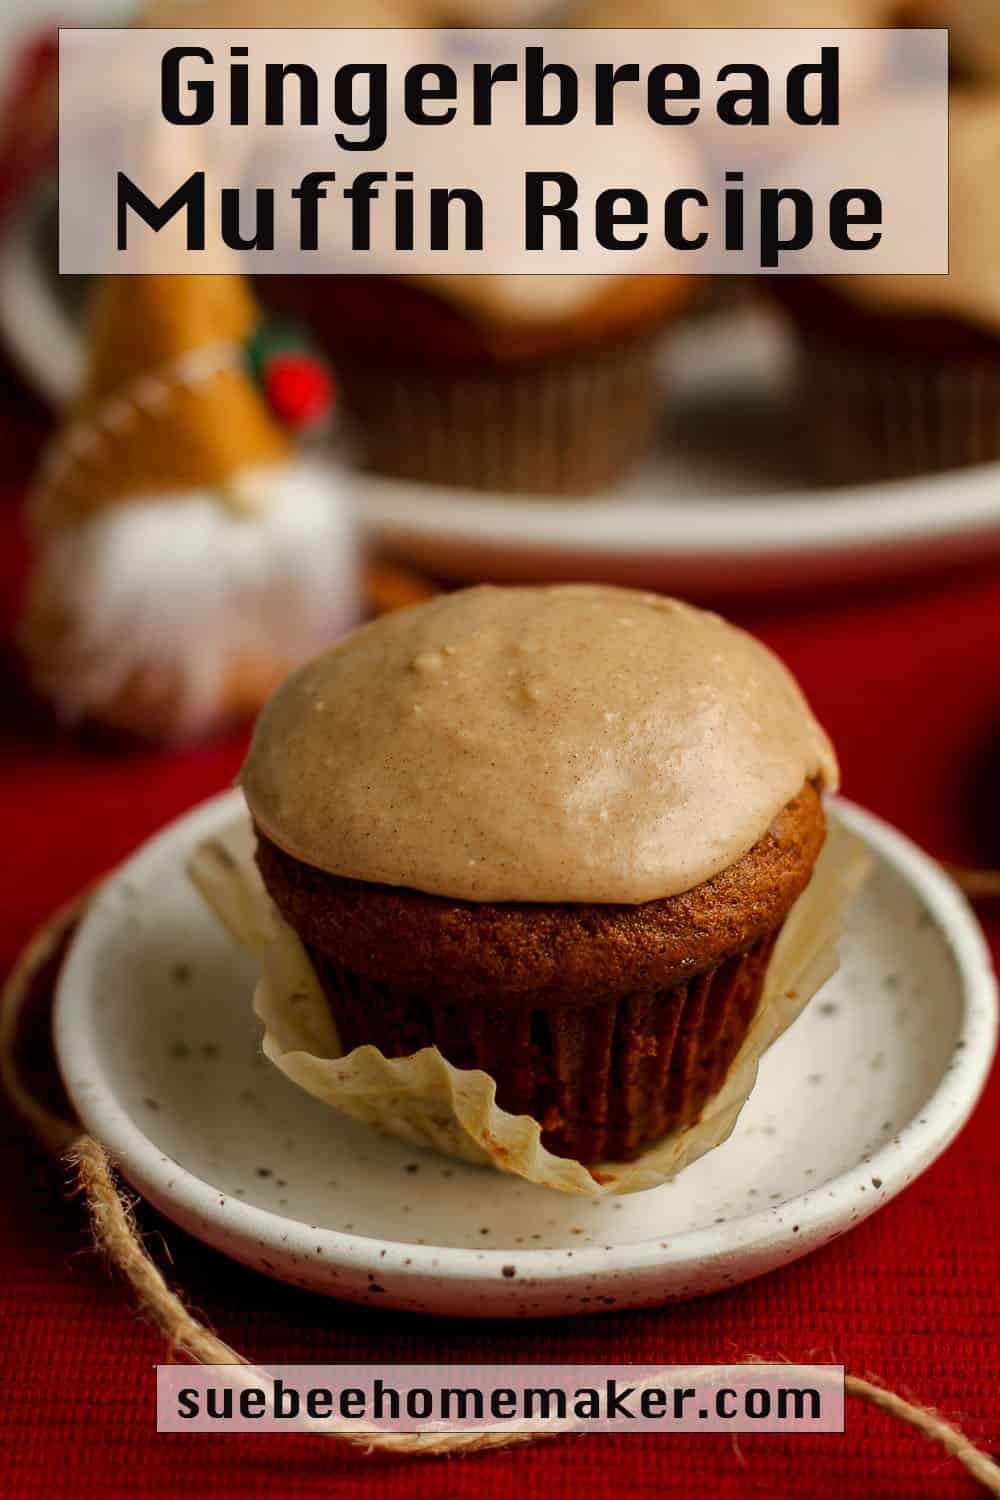 A small plate with a gingerbread muffin, with other muffins on a plate in the background.